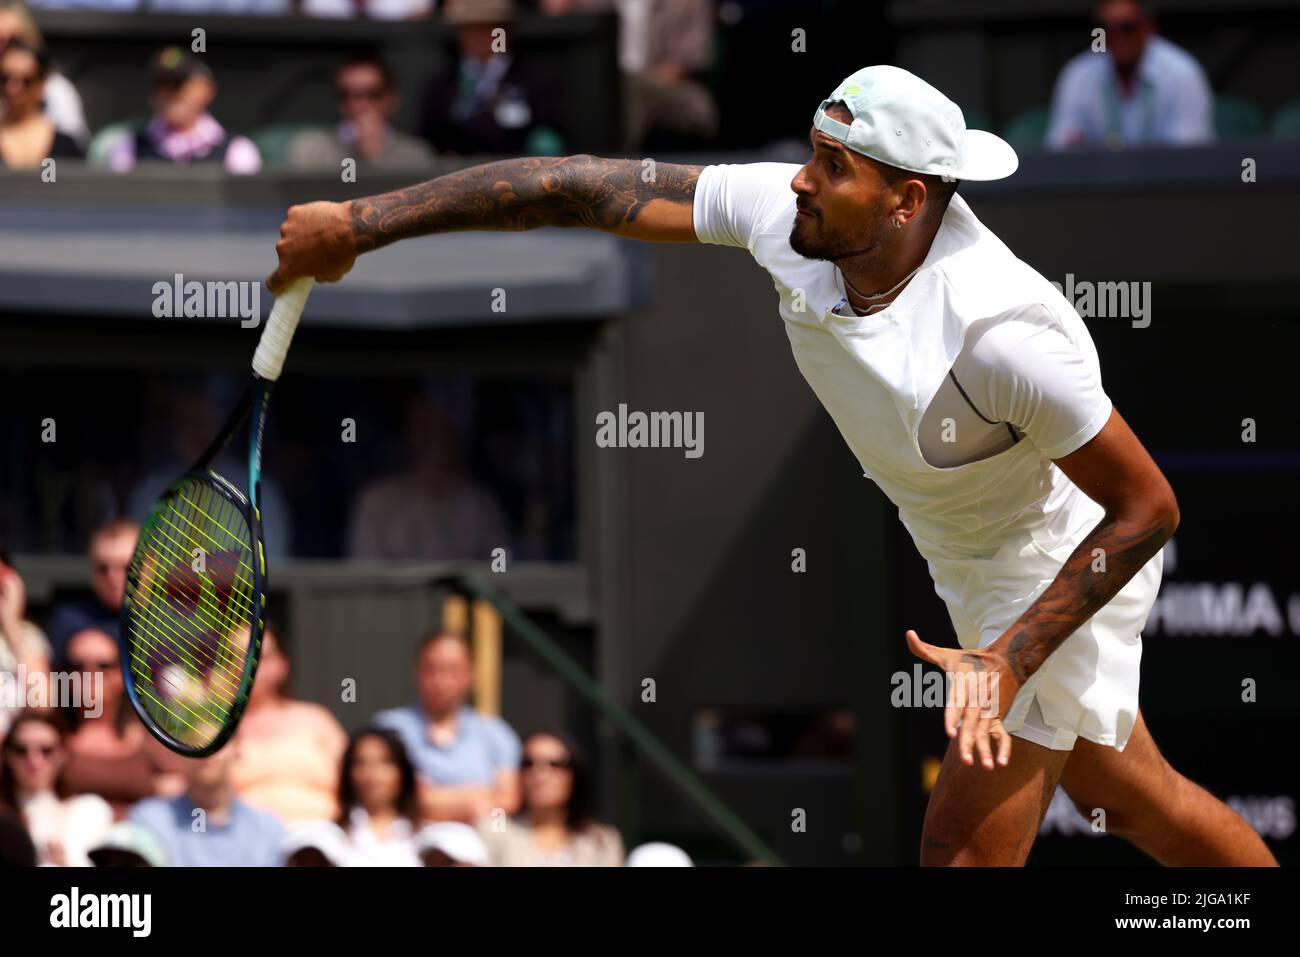 4 July 2022, All England Lawn Tennis Club, Wimbledon, London, United Kingdom Australias Nick Kyrgios serving to American Brandon Nakashima during their fourth round match on Center Court today at Wimbledon